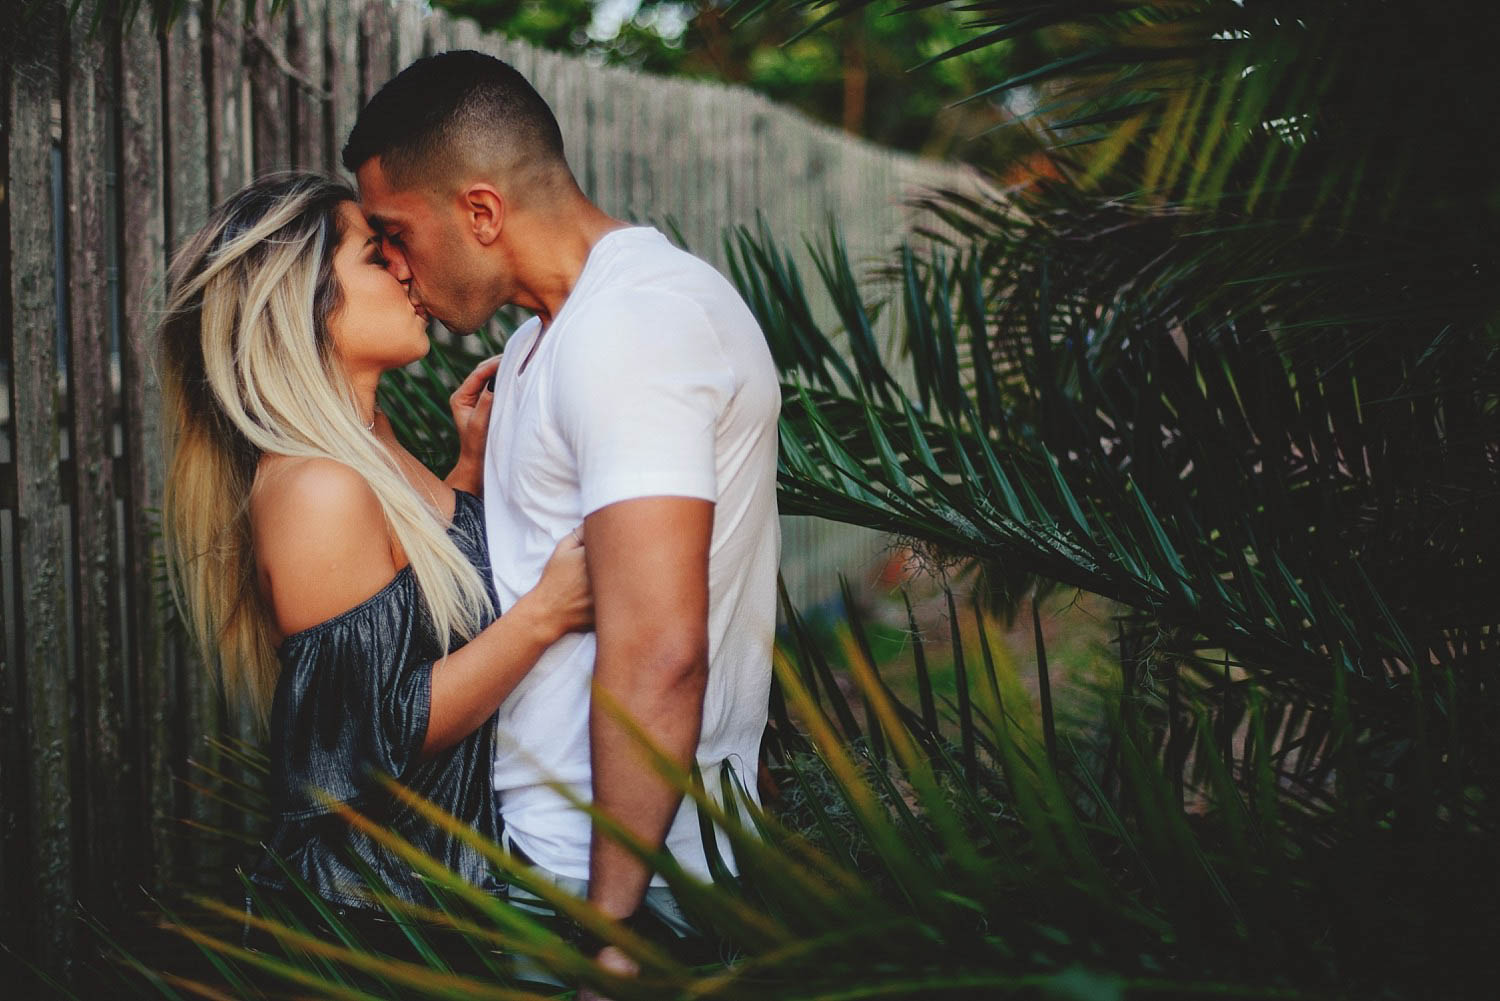 winter garden engagement photos: kissing in the bushes